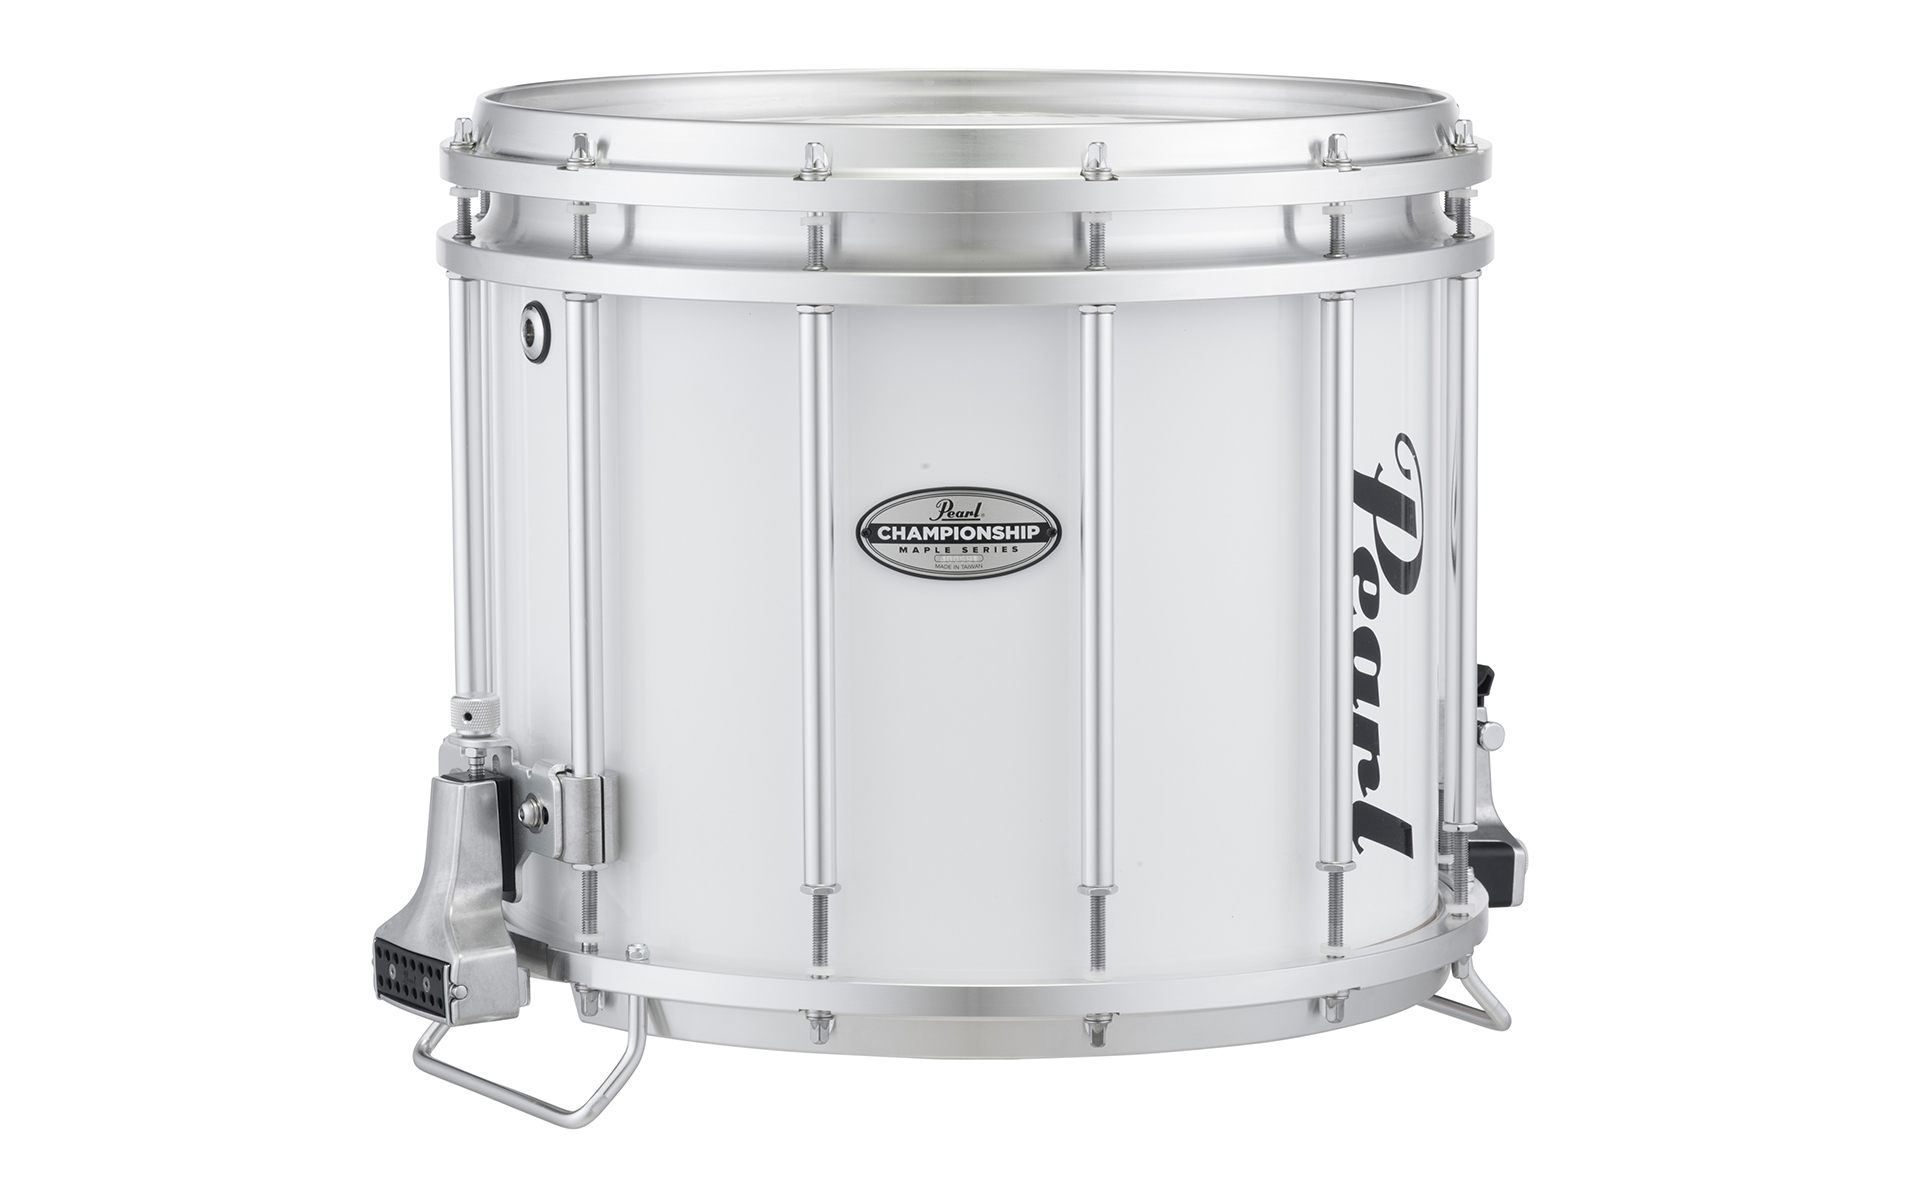 FFXM1412 Championship Maple Snare Drums